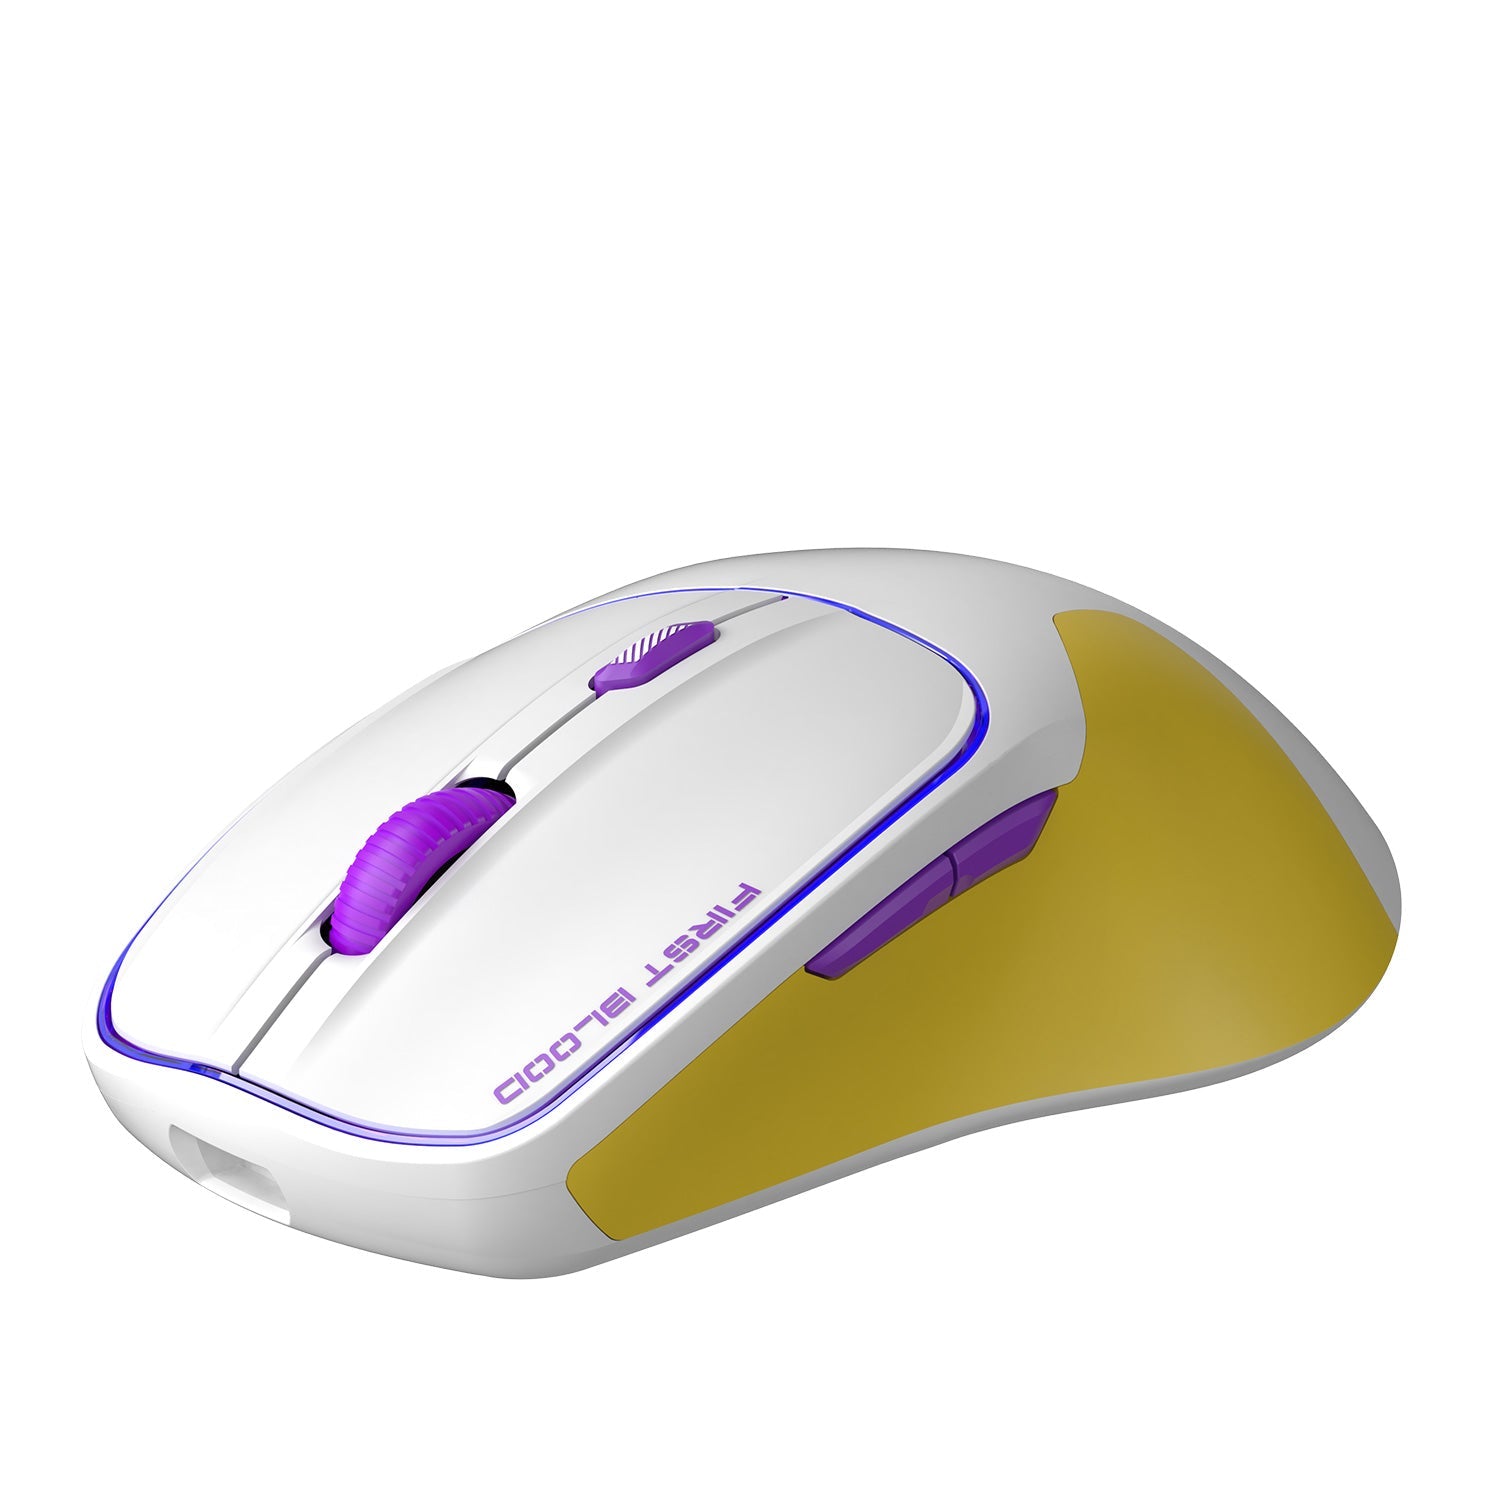 Firstblood F22 Mouse